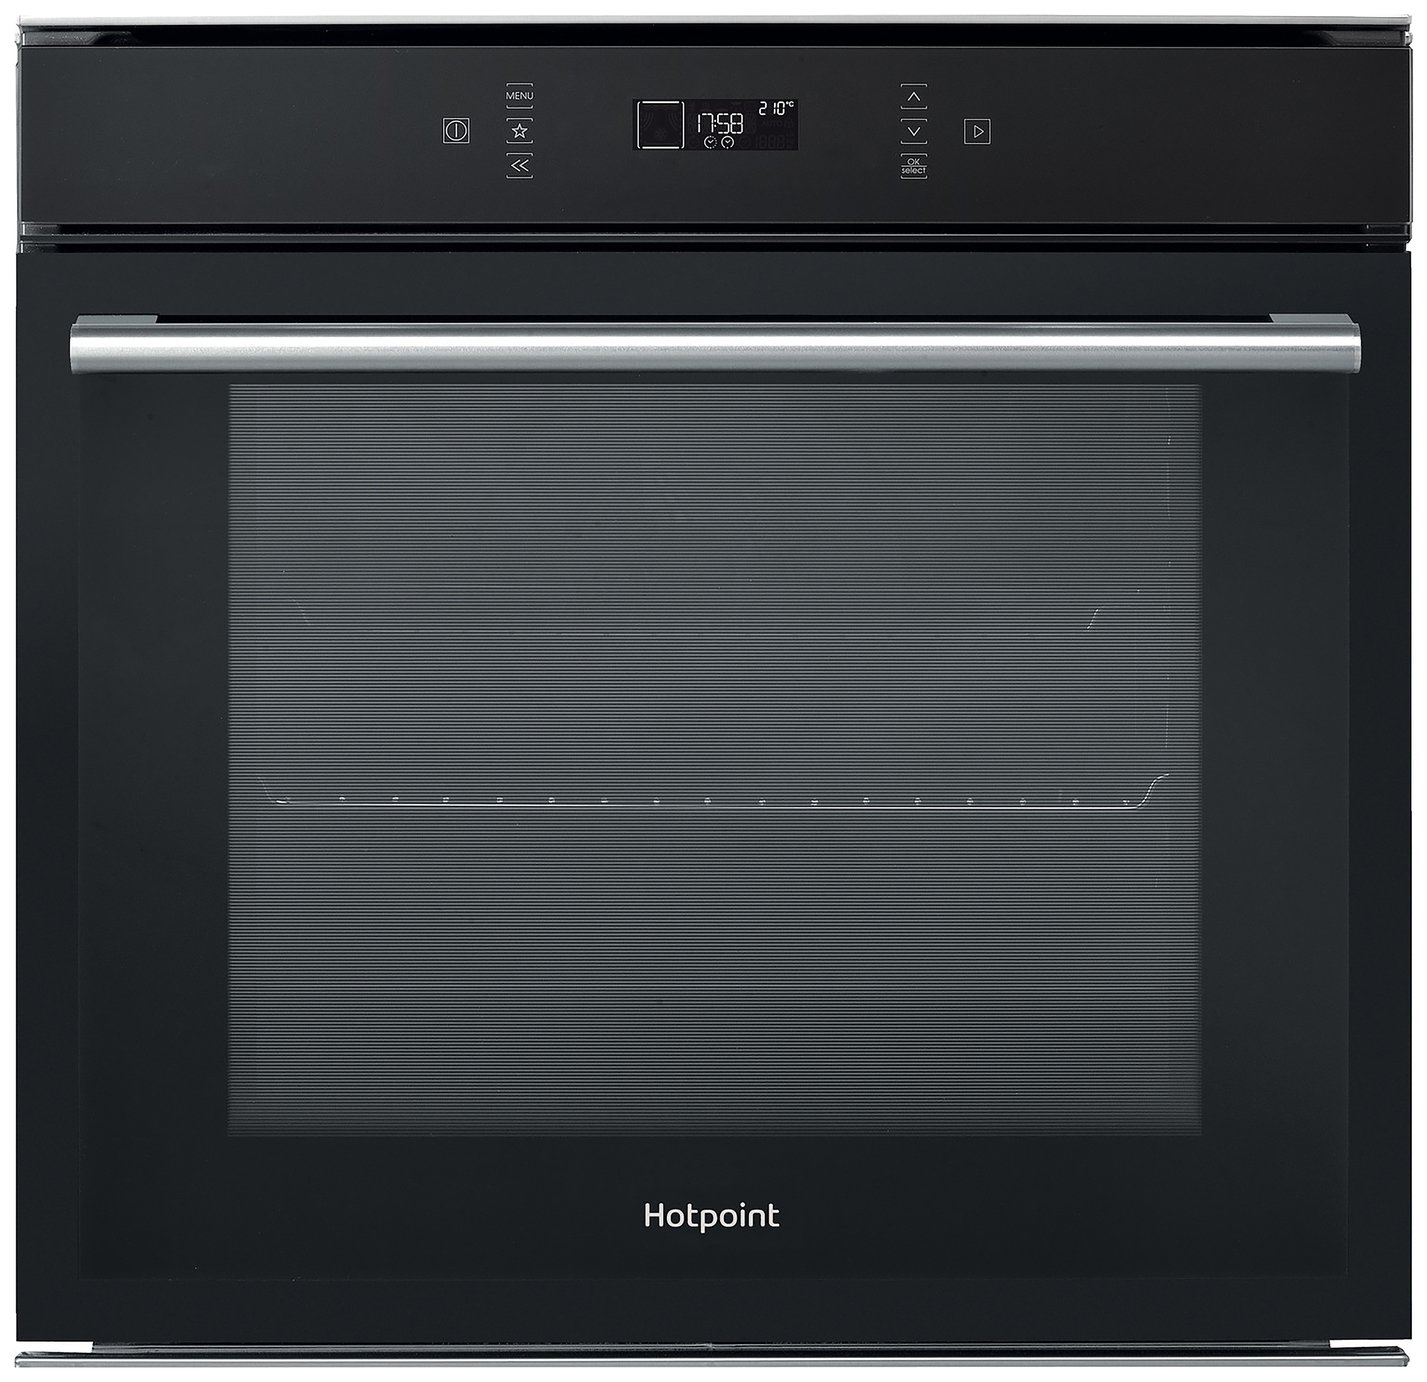 Hotpoint SI6 871 SP BL Built In Single Electric Oven - Black